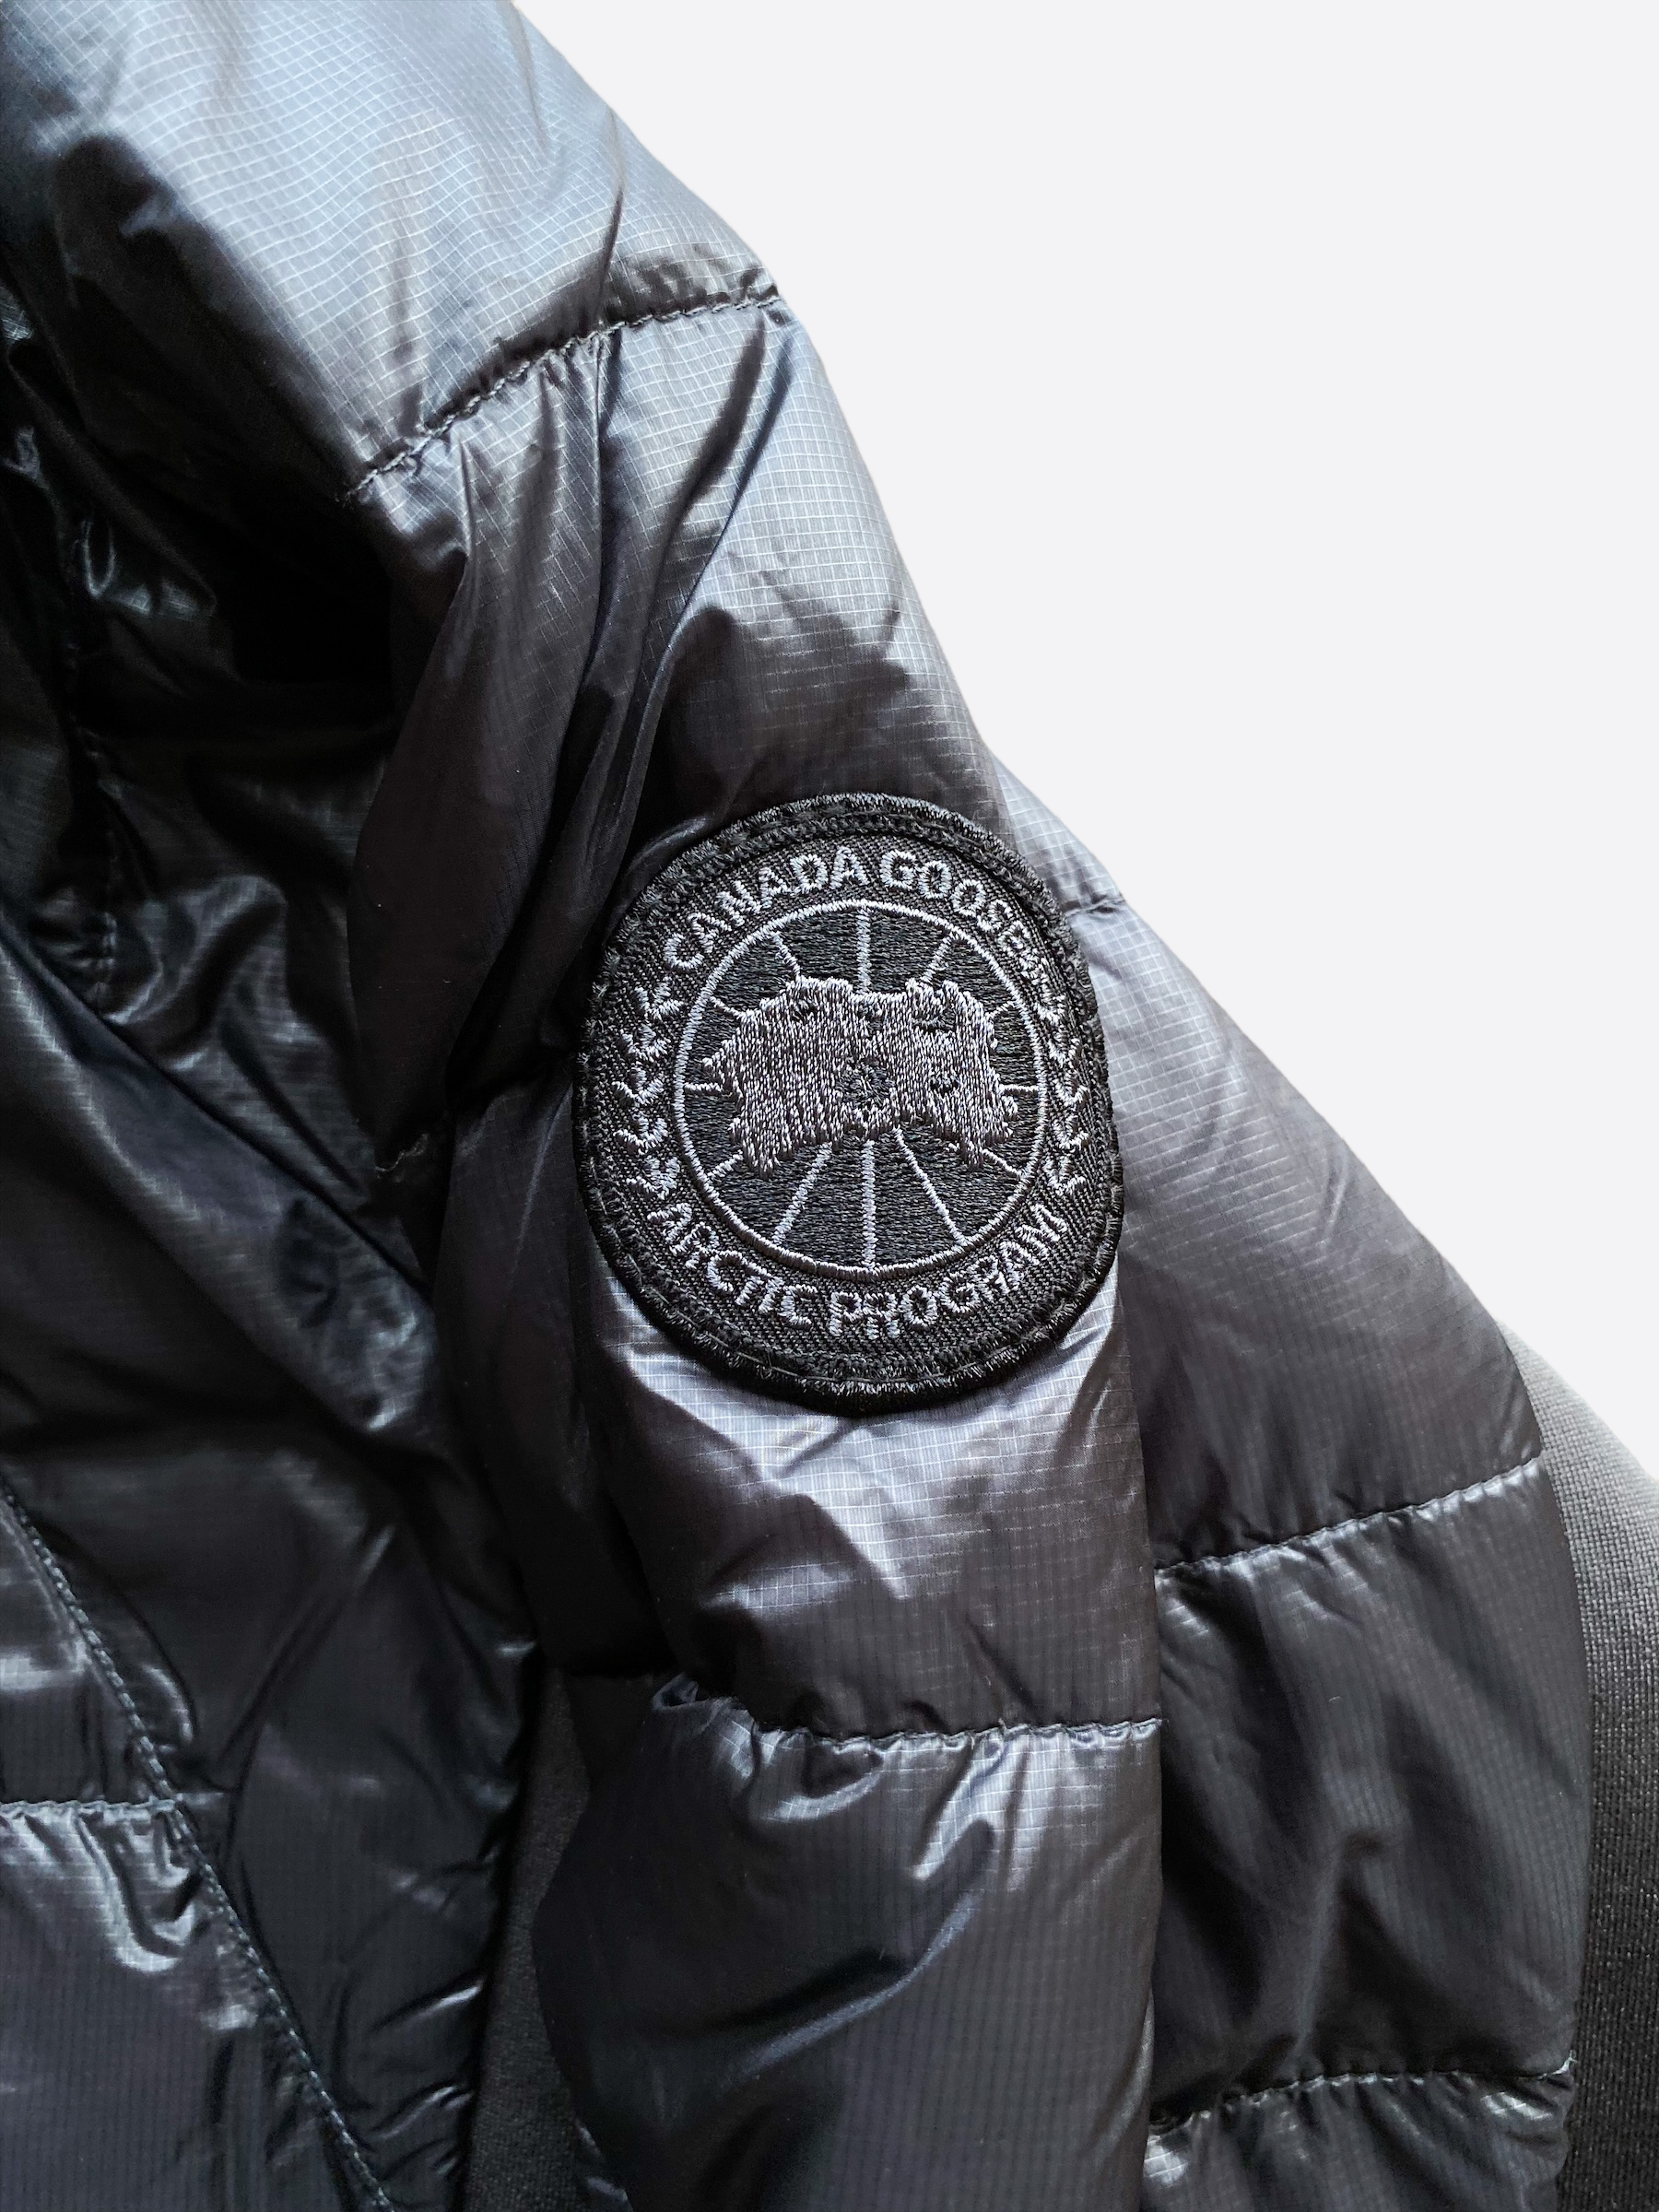 Canada Goose Hybridge Lite Hoody Review | Tested by GearLab